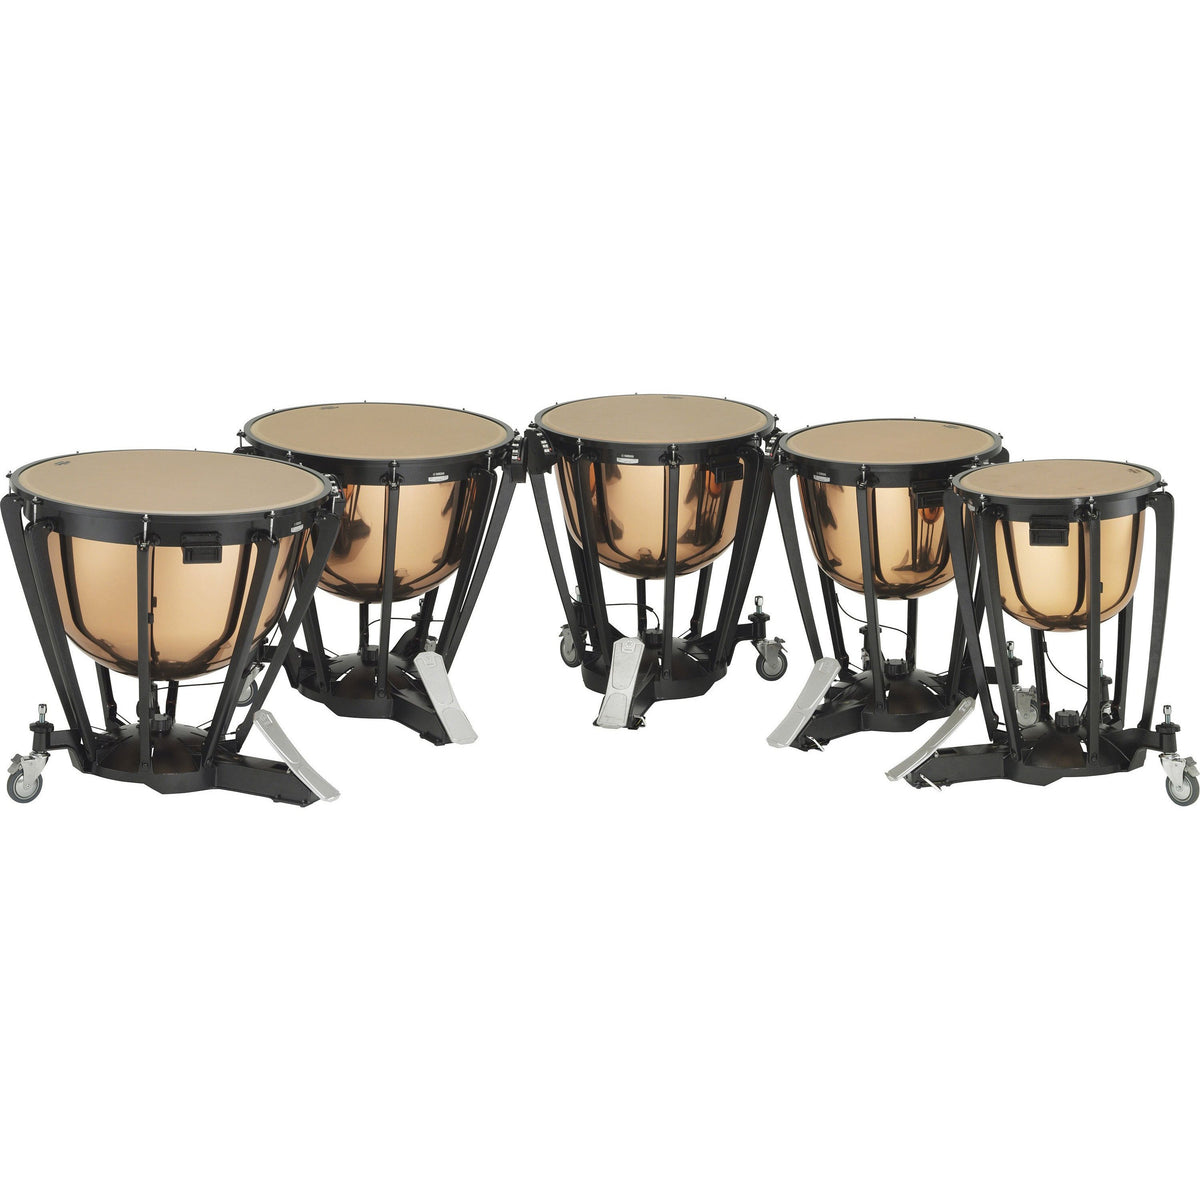 Yamaha - TP-6300R Series - Pedal Timpani with Copper Bowl-Percussion-Yamaha-Music Elements